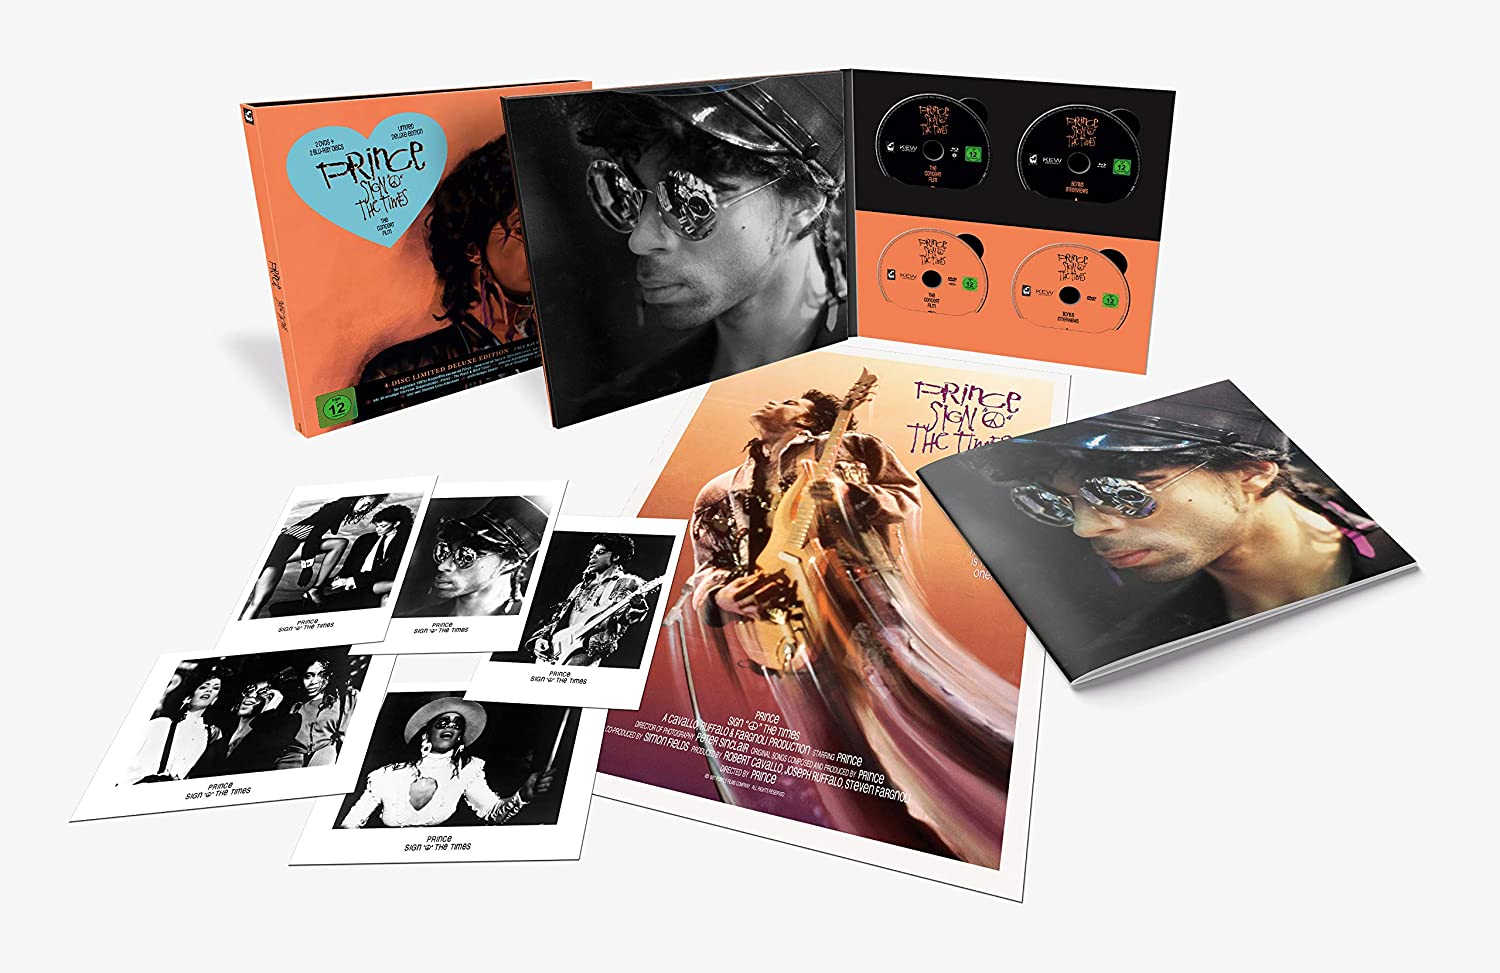 Prince -  Sign 'O' the Times - Limited Deluxe Edition